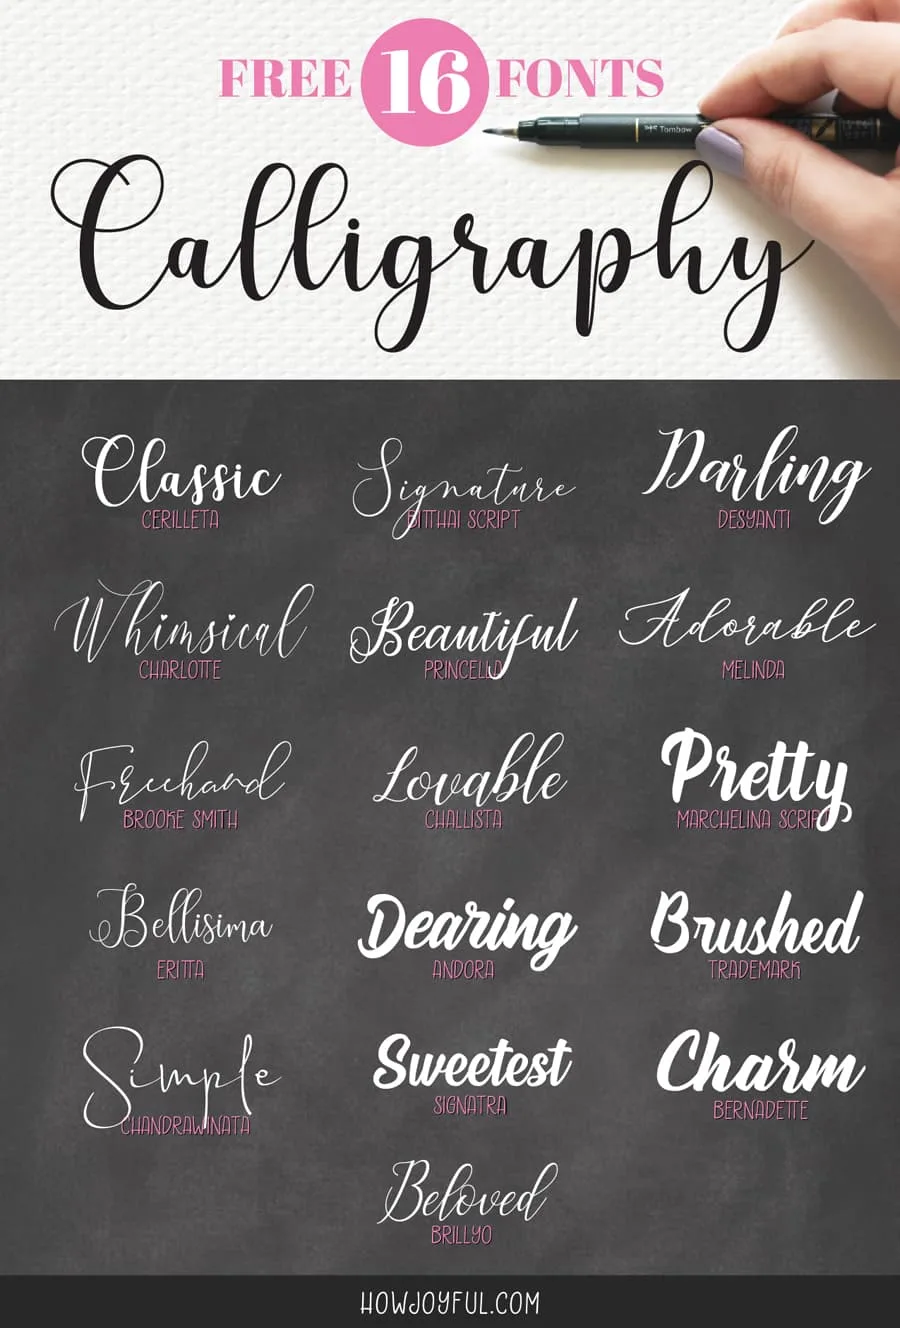 Modern Calligraphy Brush Lettering Workbook digital Download Lowercase  Uppercase Hand Lettering Worksheets Words, Quotes, Tricky Combos 